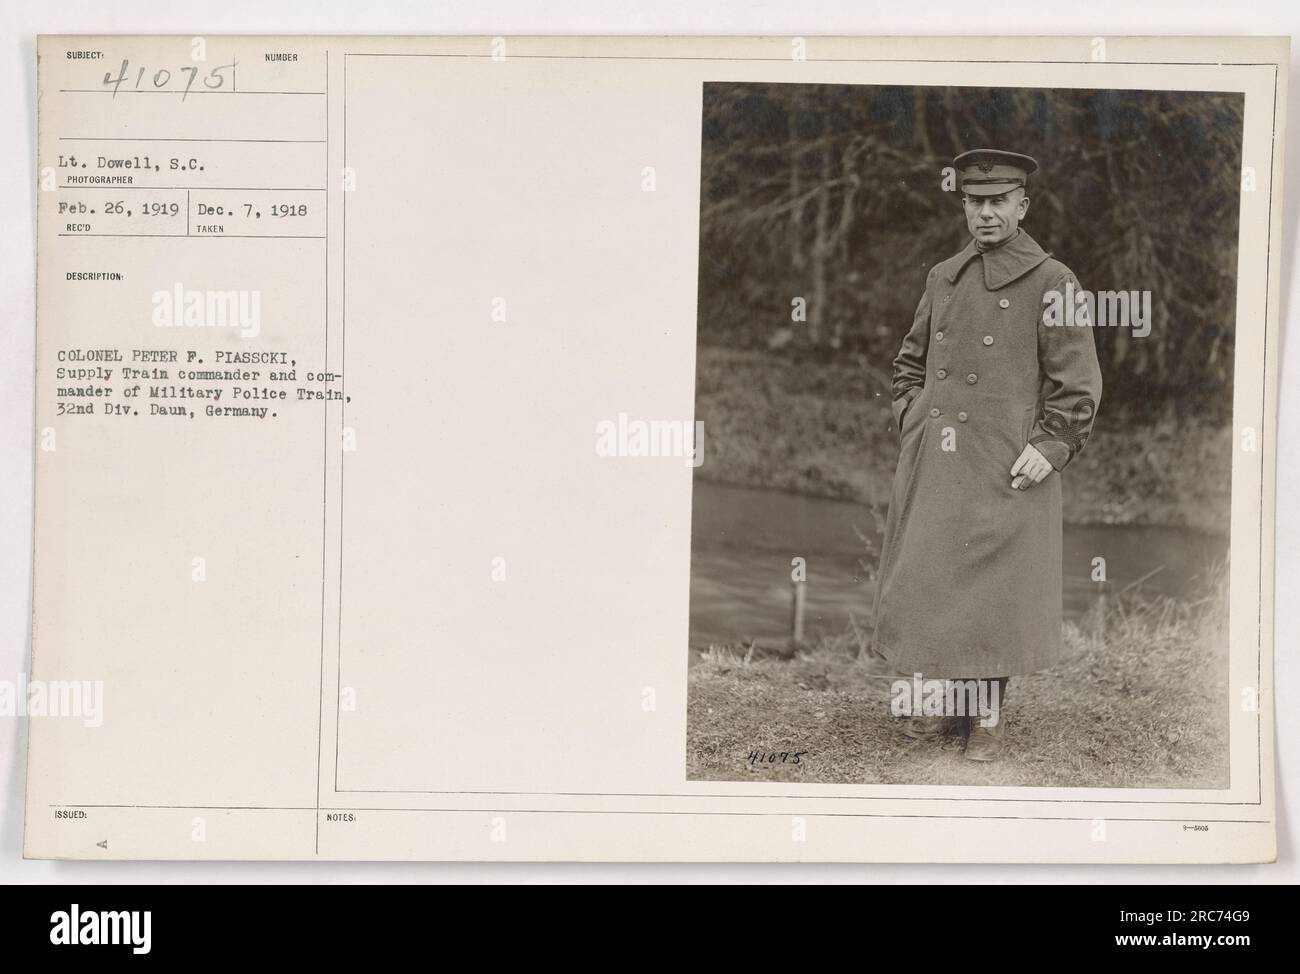 Colonel Peter P. Piasscki, the commander of the Supply Train and Military Police Train of the 32nd Division, is seen in Daun, Germany. The photograph was taken on February 26, 1919 by Lt. Dowell. It was received on December 7, 1918 and is labeled as number 18 in the collection. Stock Photo